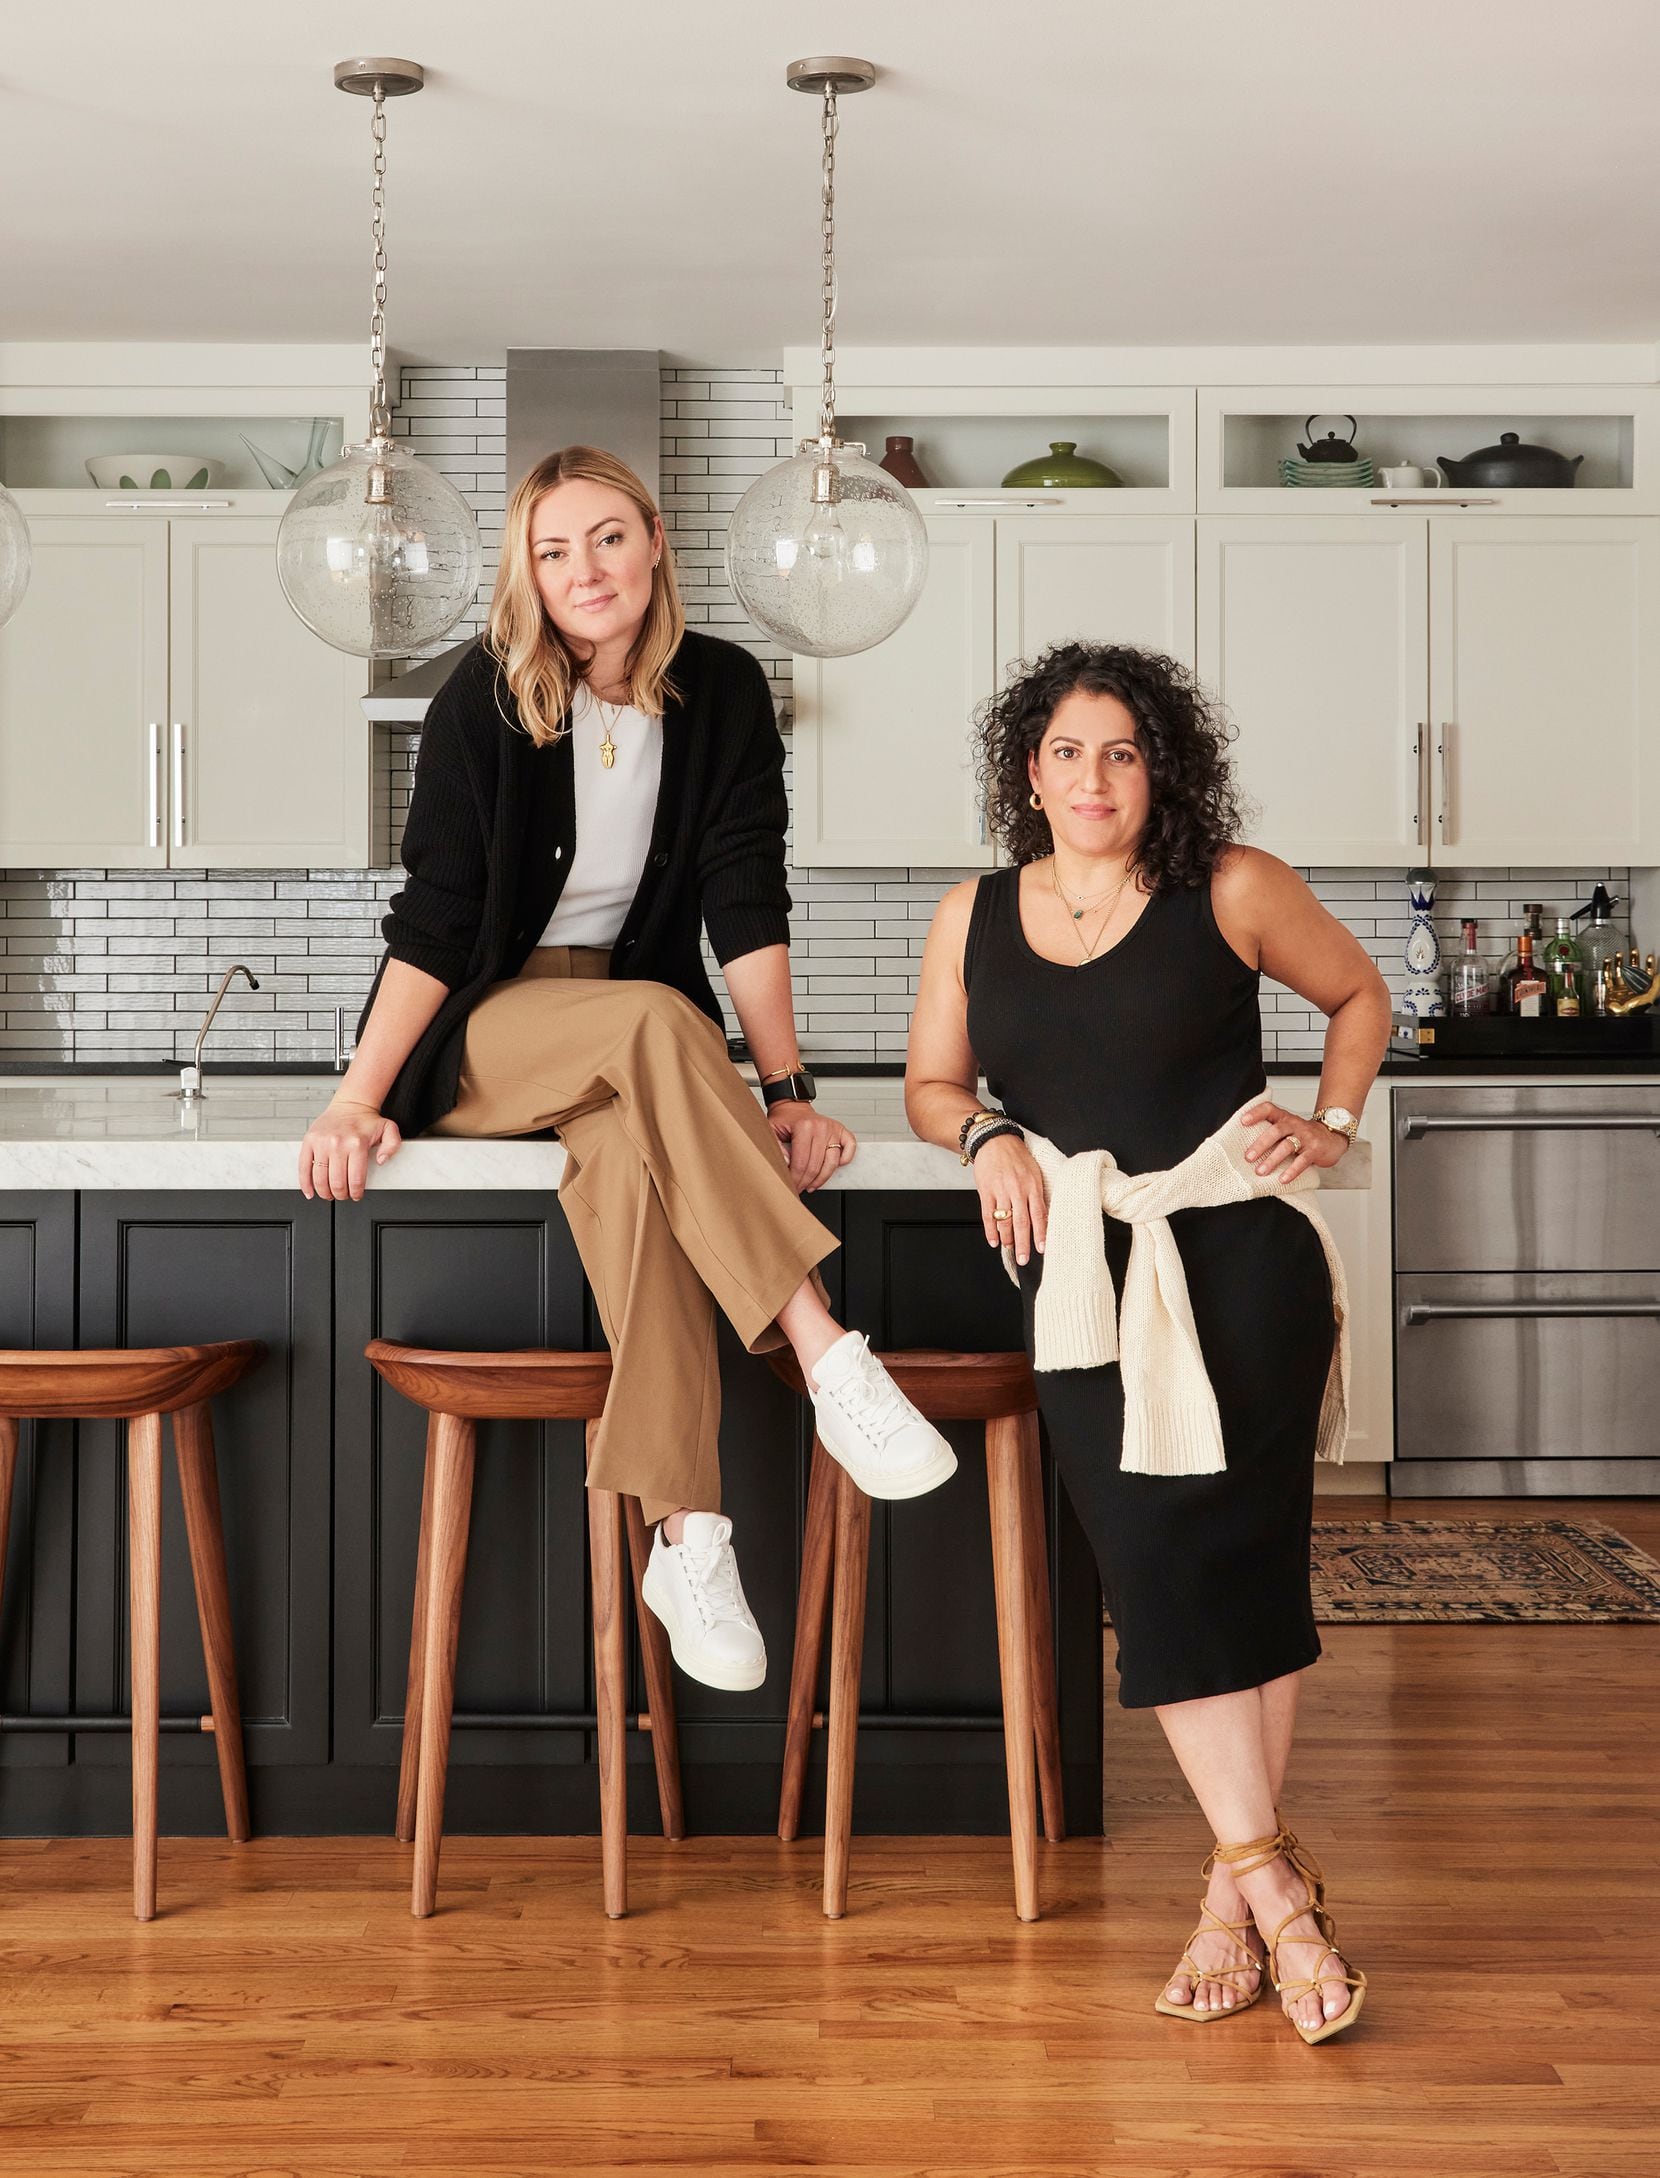 The designers pose in a kitchen.